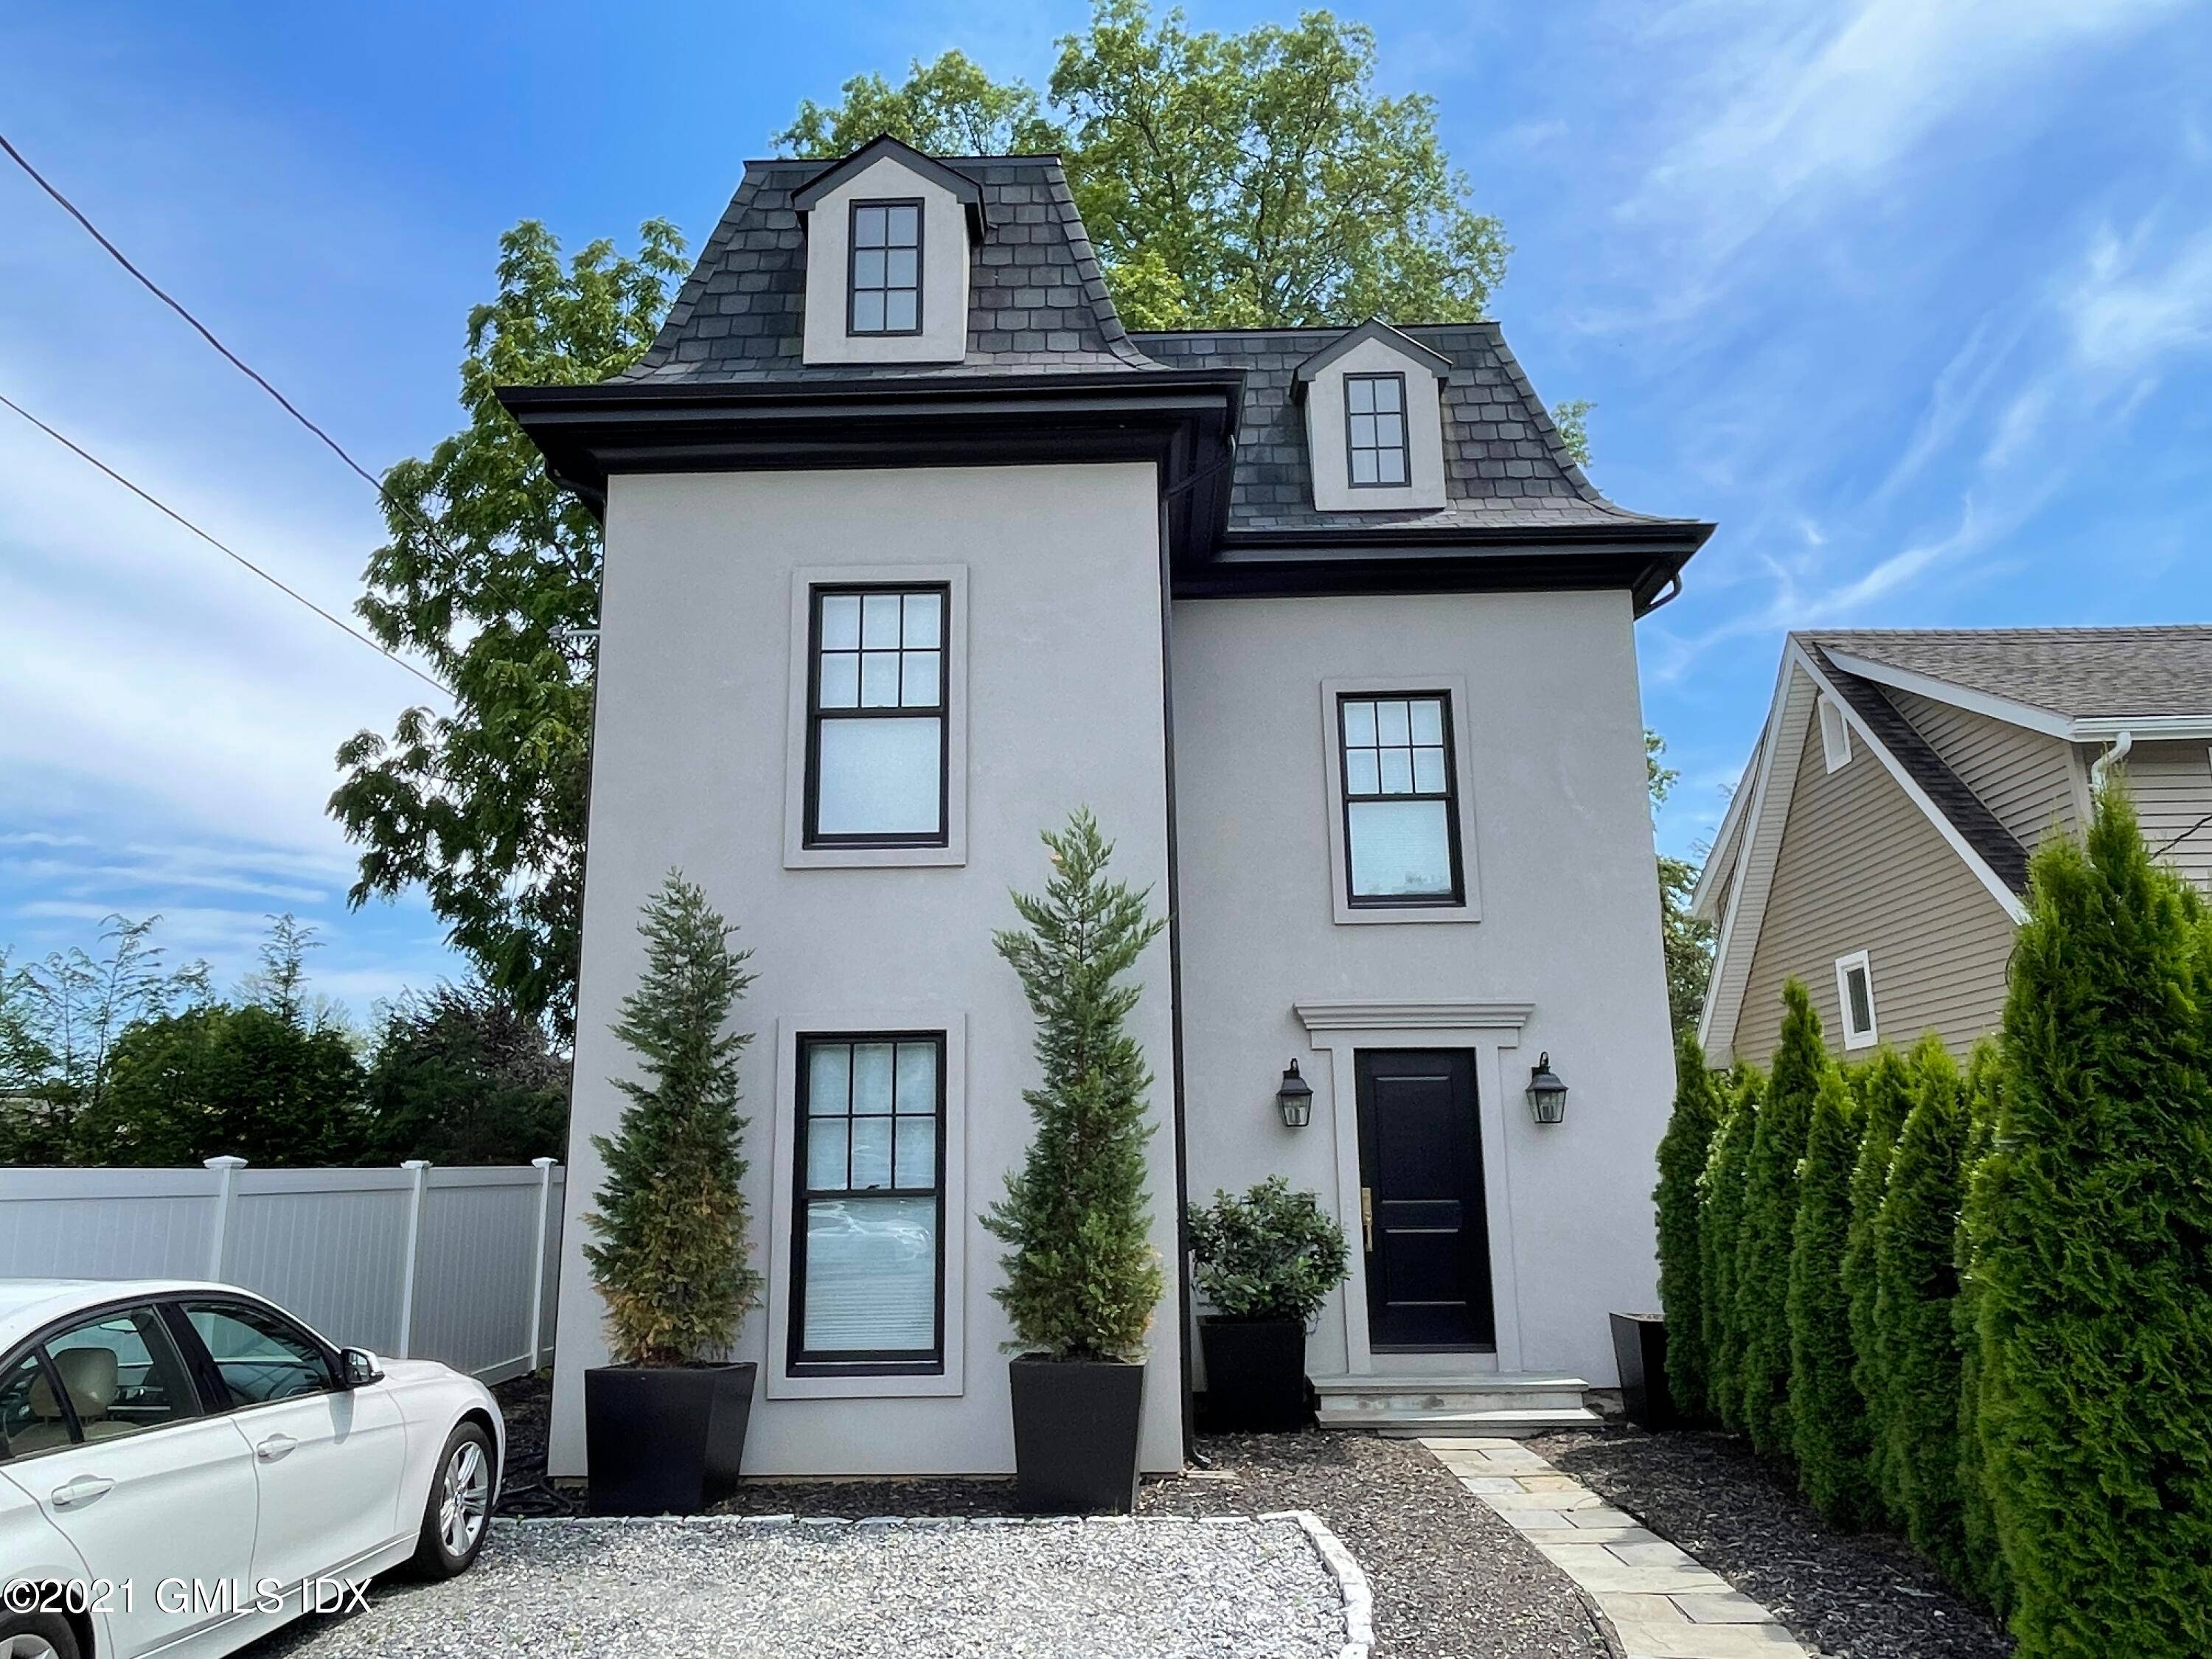 Impeccable, 2019 renovated in town home delivers stylish interior with covered terrace, affording peaceful views and fenced in backyard, feet from Greenwich Ave.